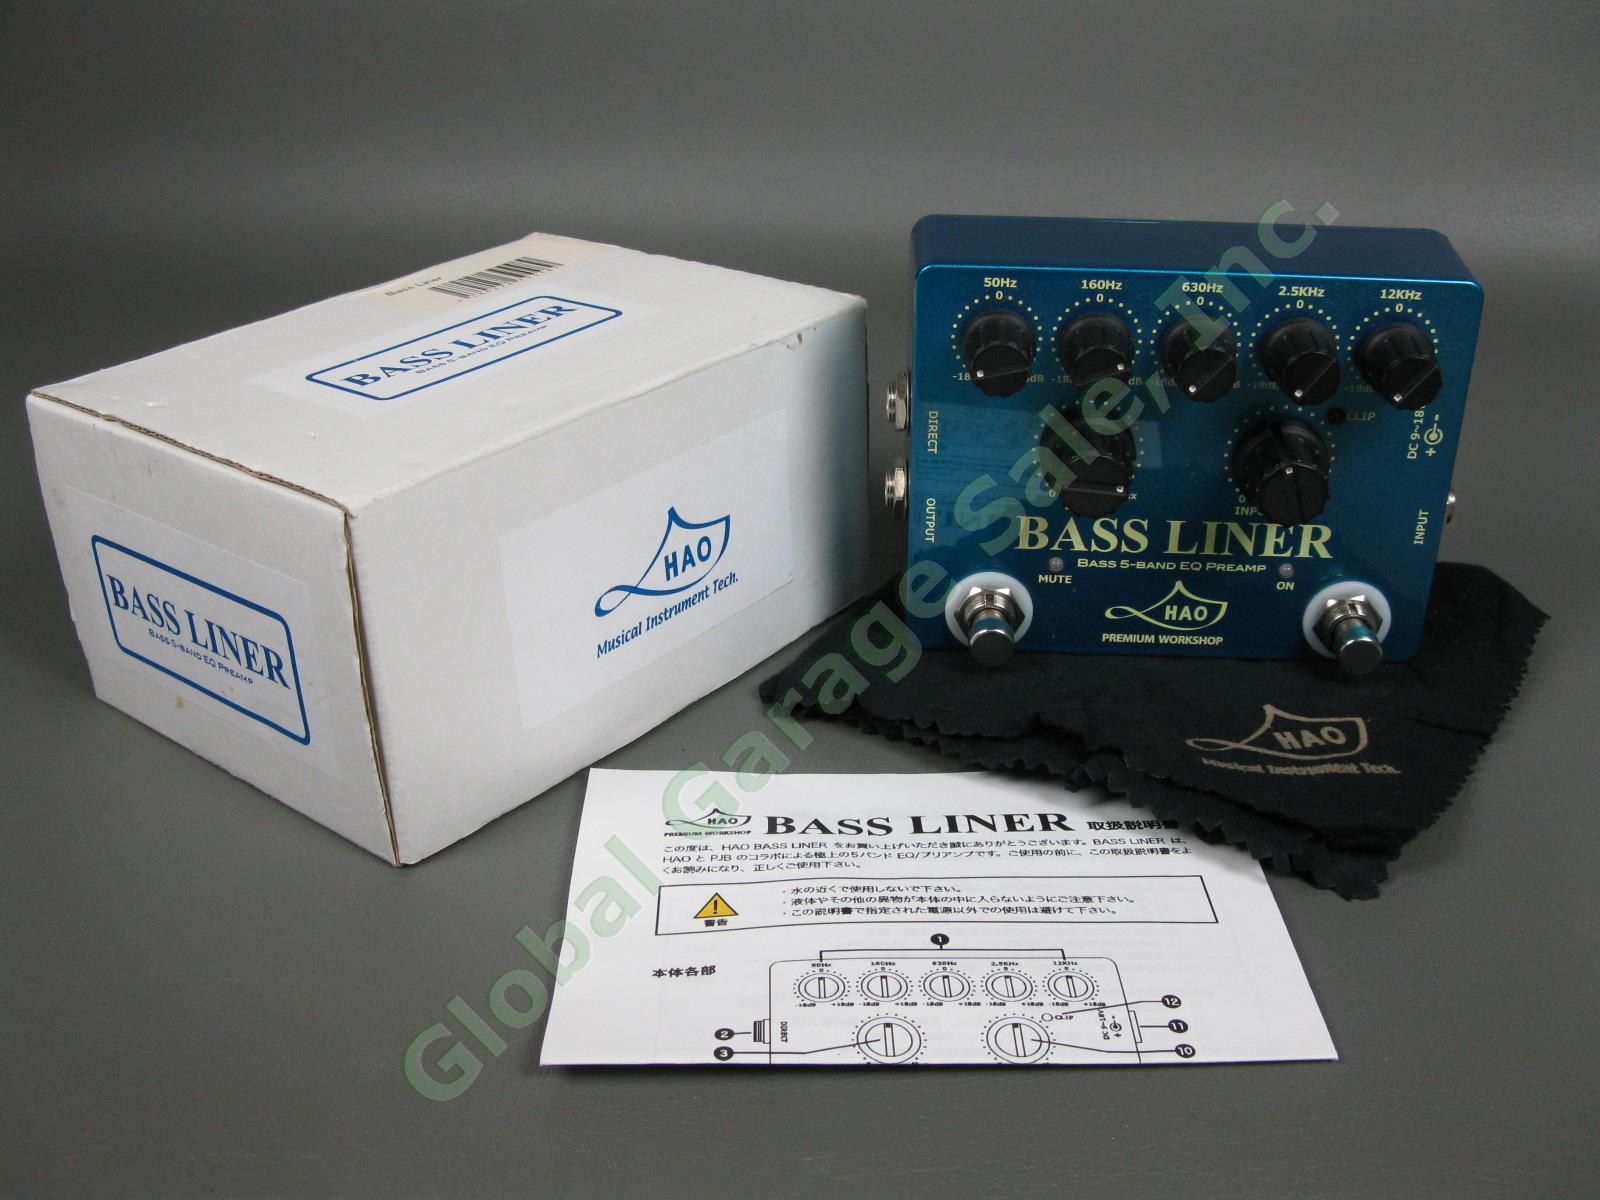 HAO Bass Liner Preamp 5-band EQ Phil Jones Audio Guitar Effects Pedal WORKS USA